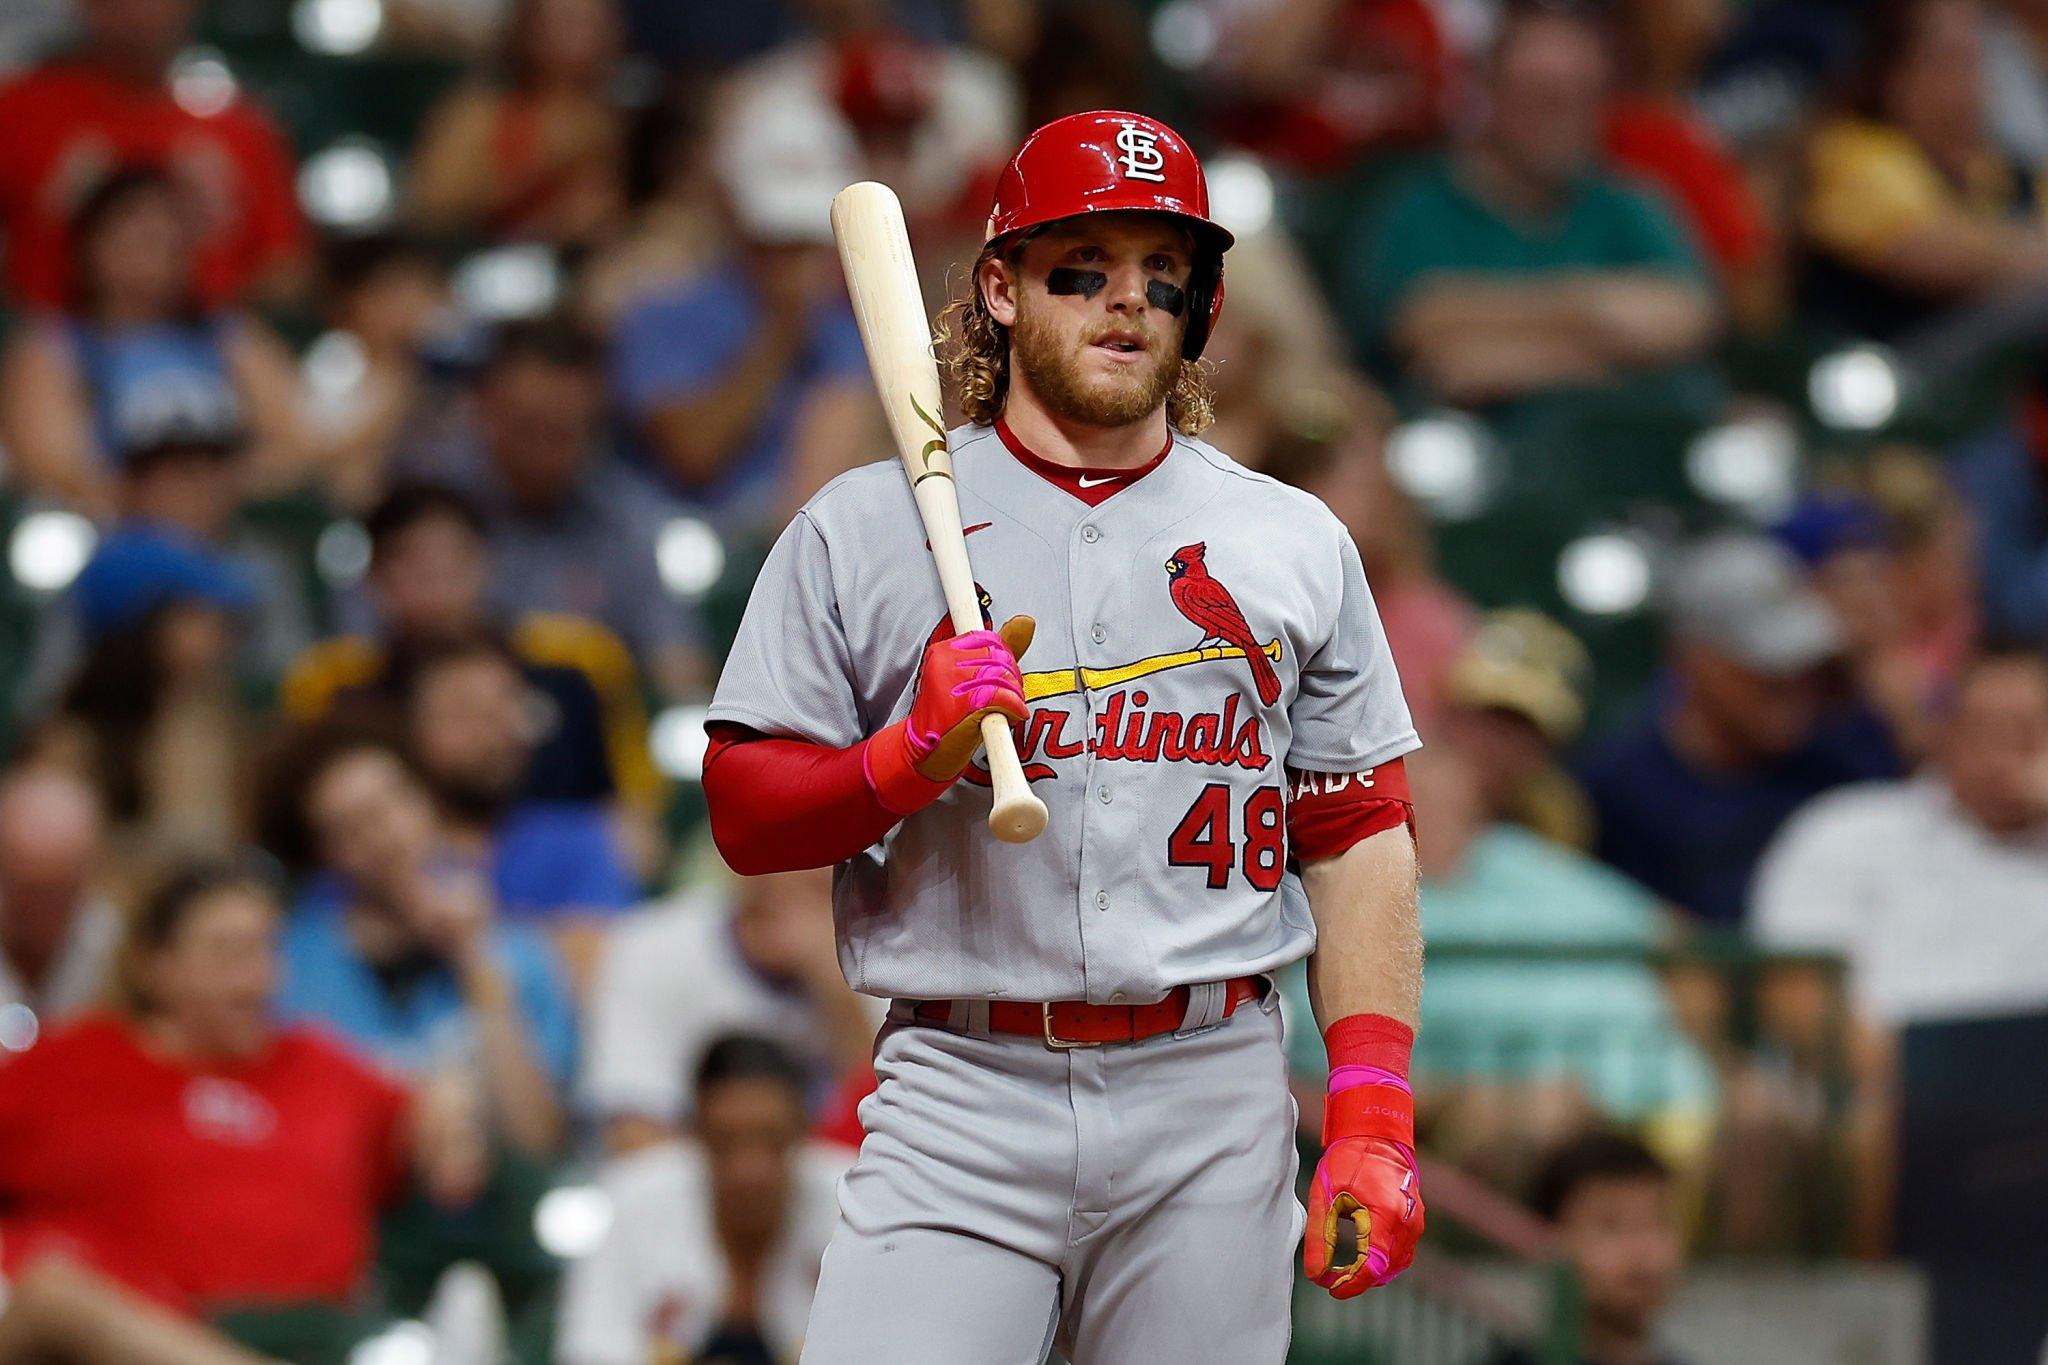 Yankees Notebook: Harrison Bader back in lineup after being put on